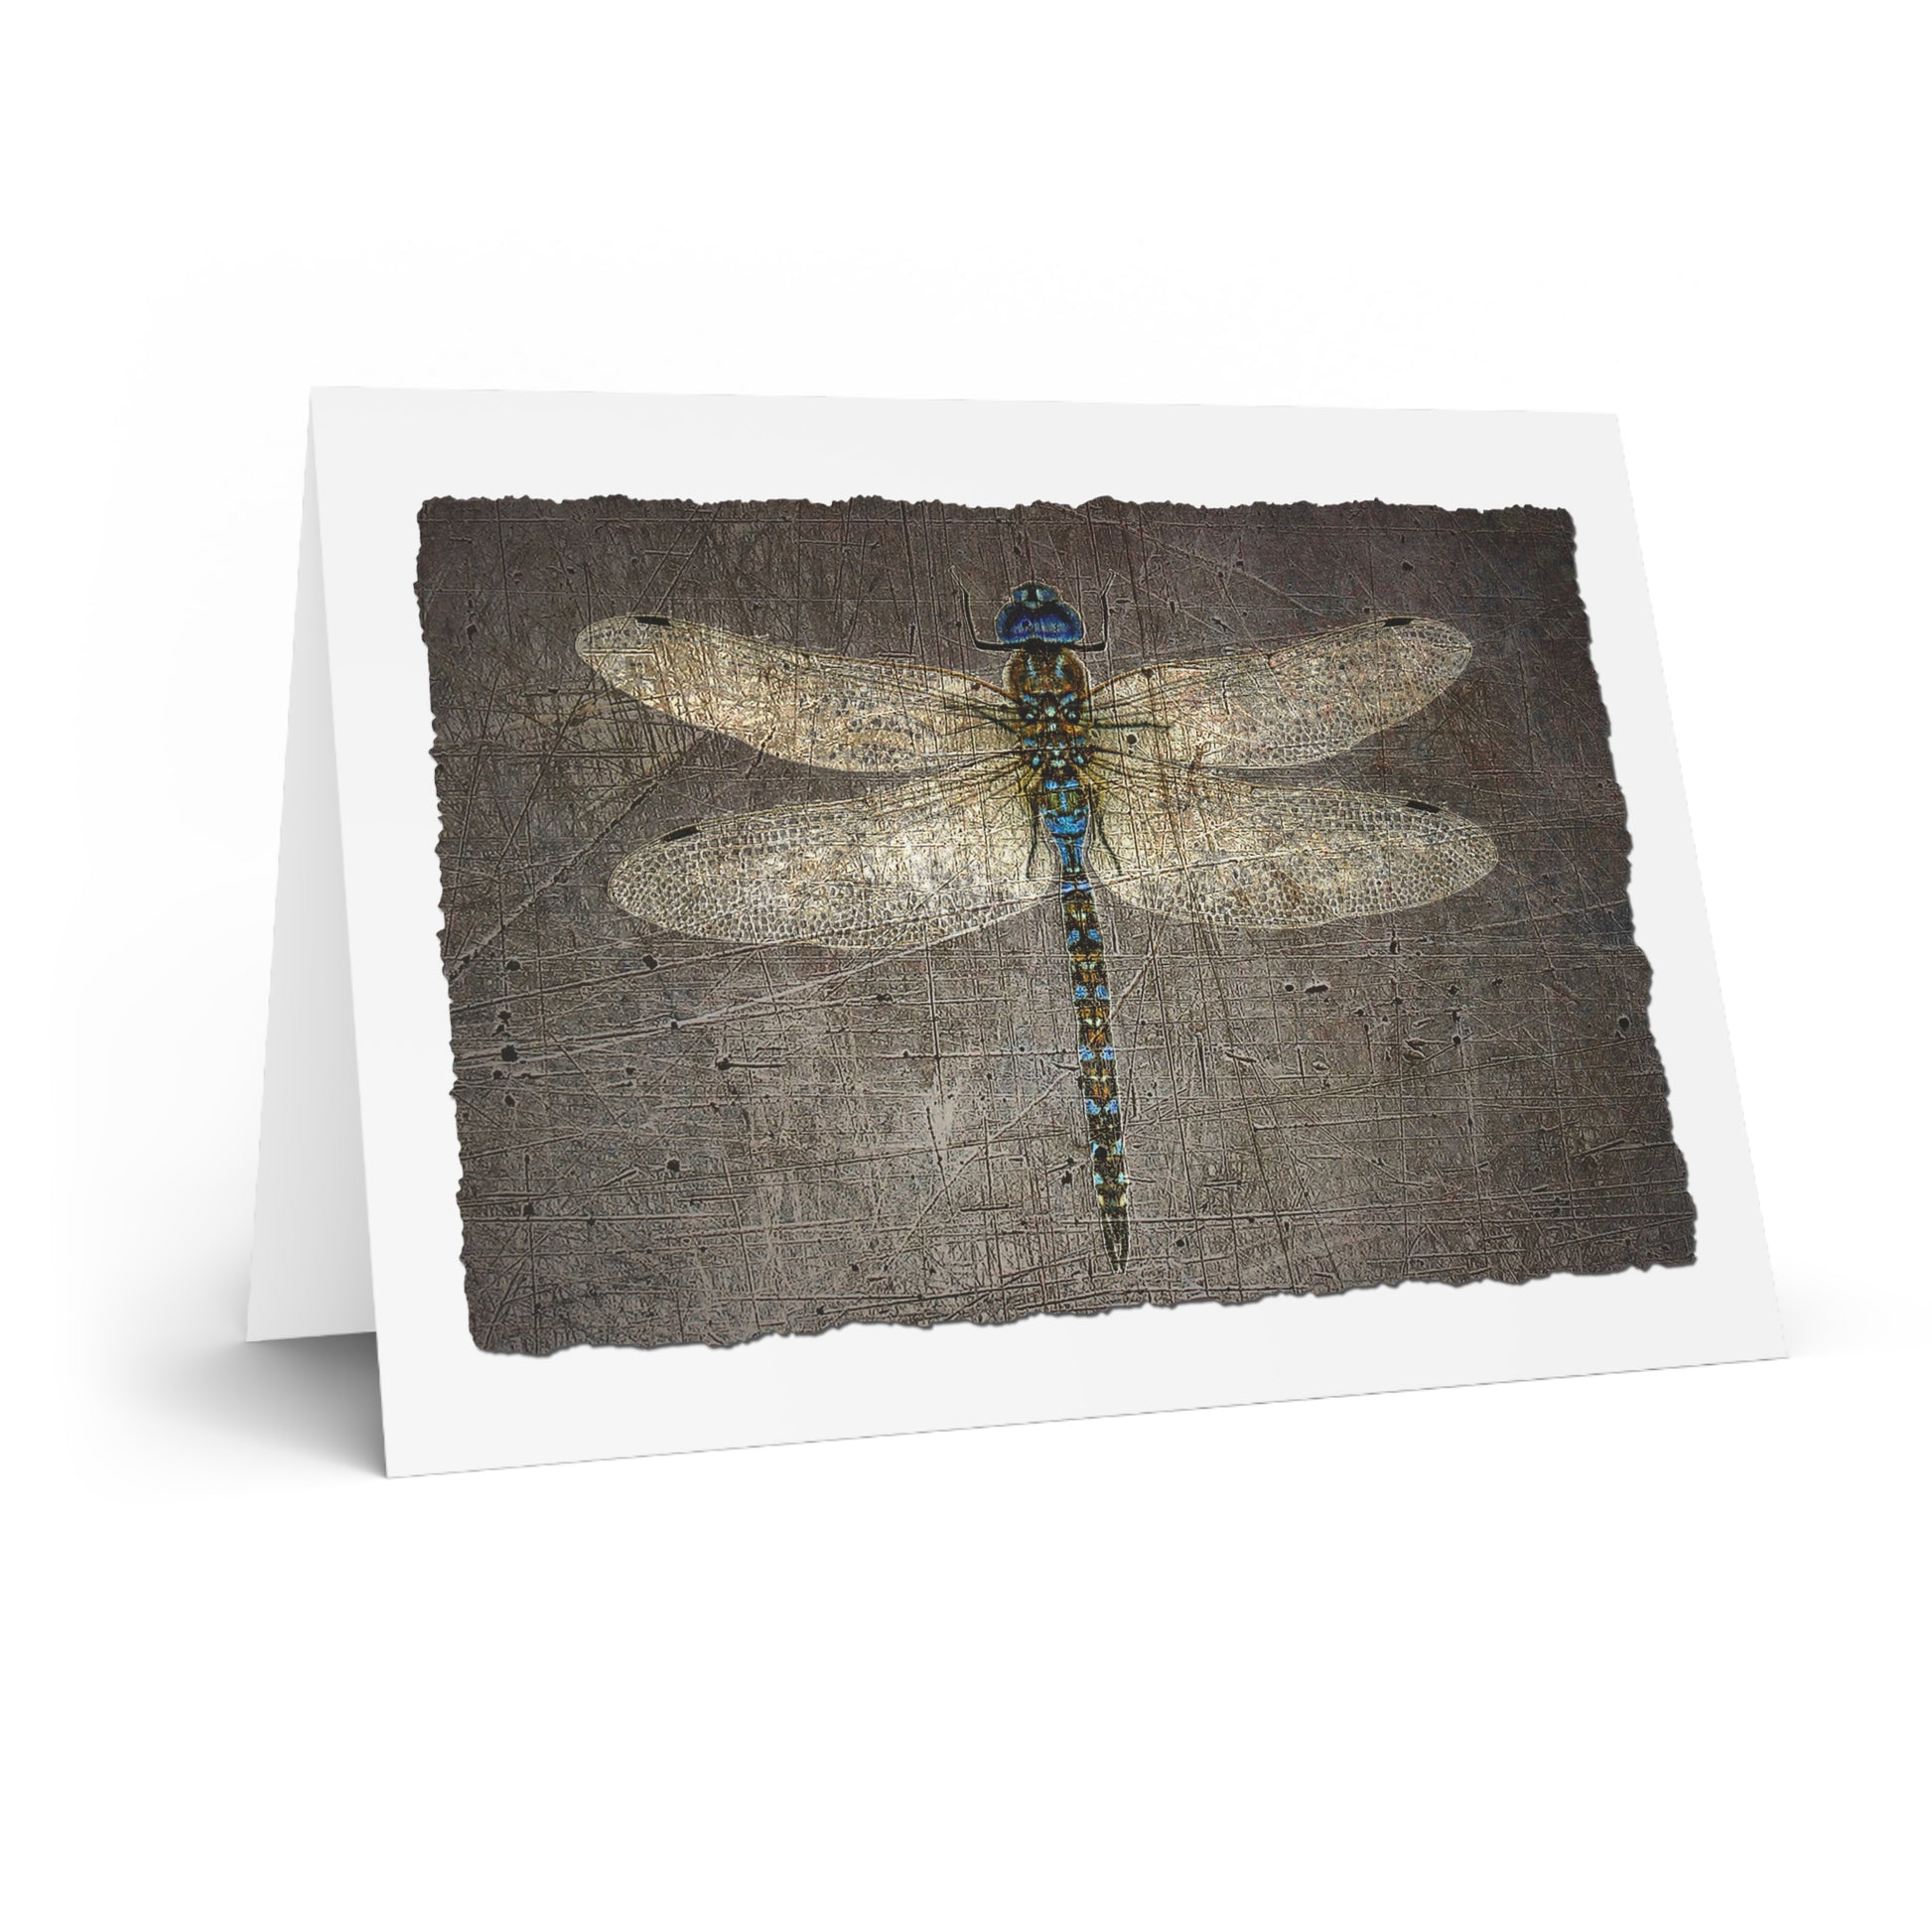 Dragonfly Themed Stationery Gray Dragonfly Blank Greeting Cards with Envelopes side view